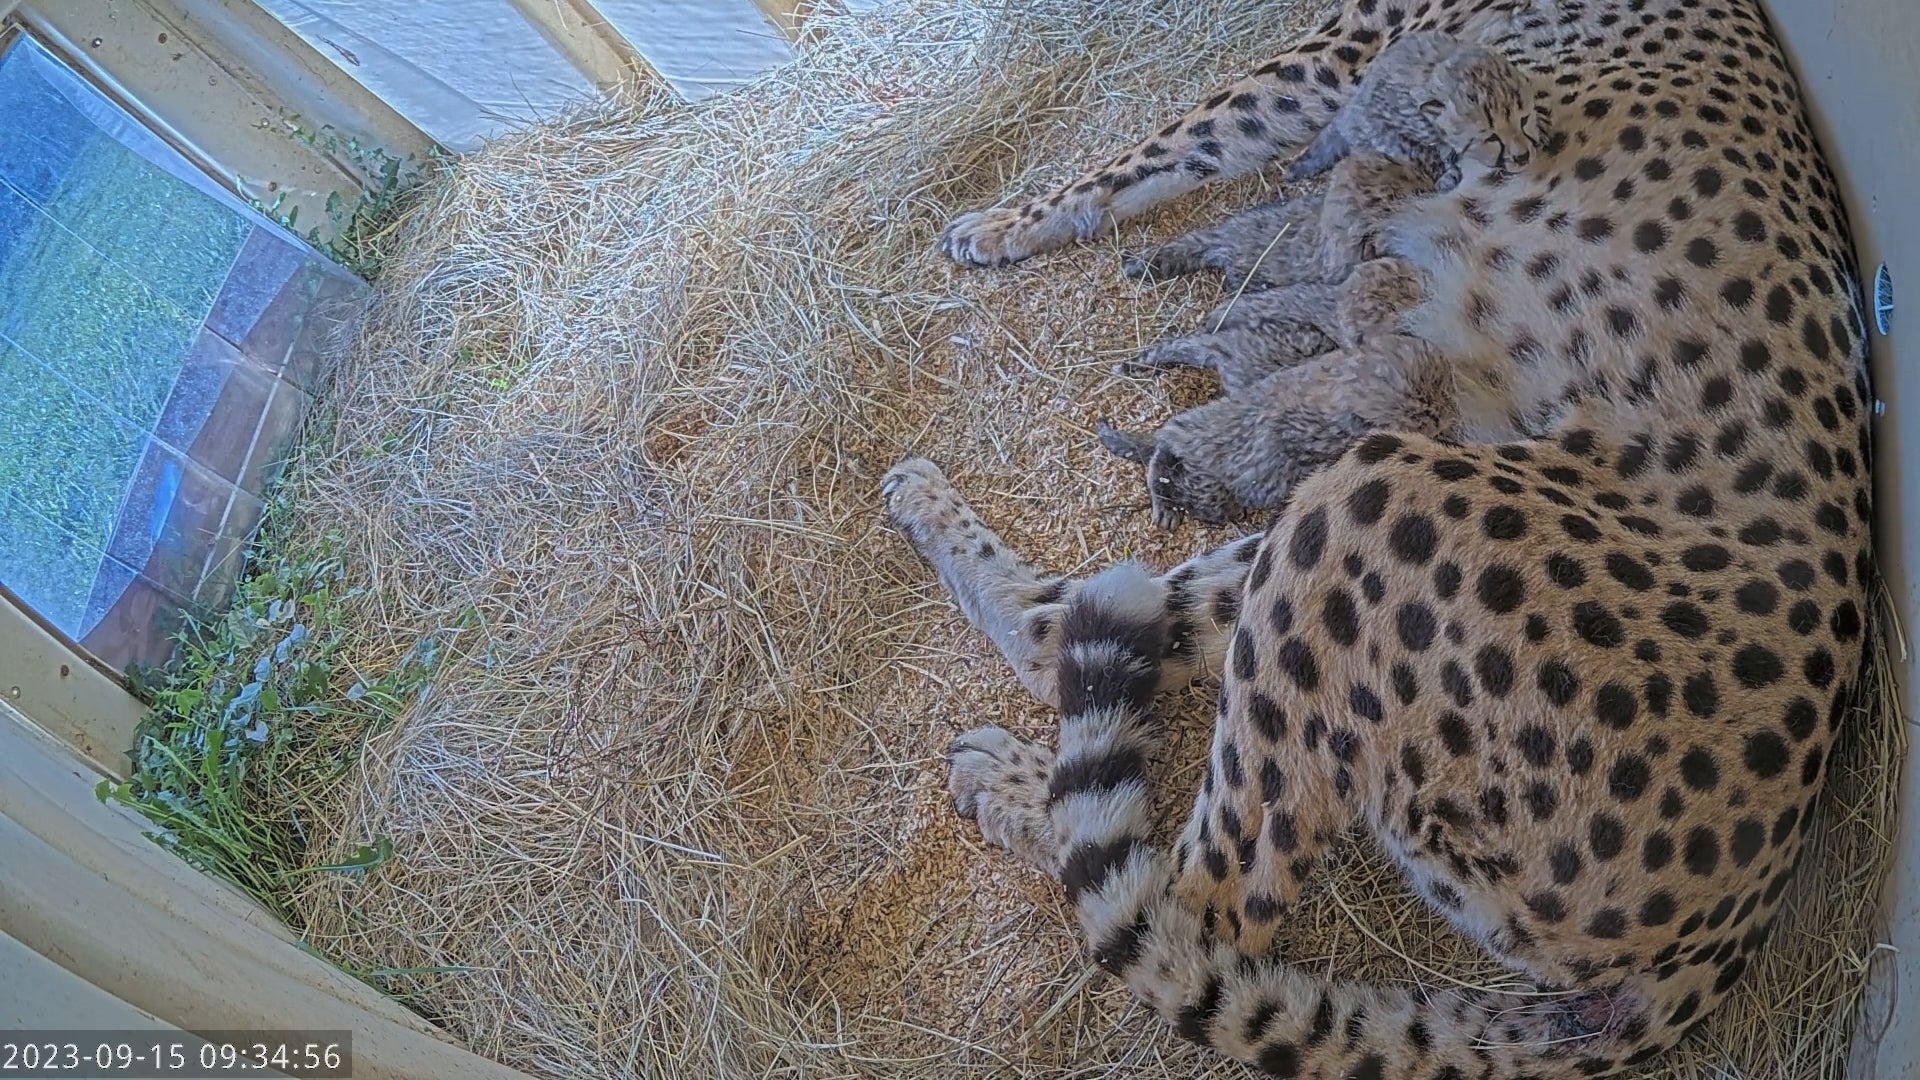 Cheetah Echo with her cubs born Sept. 12, 2023